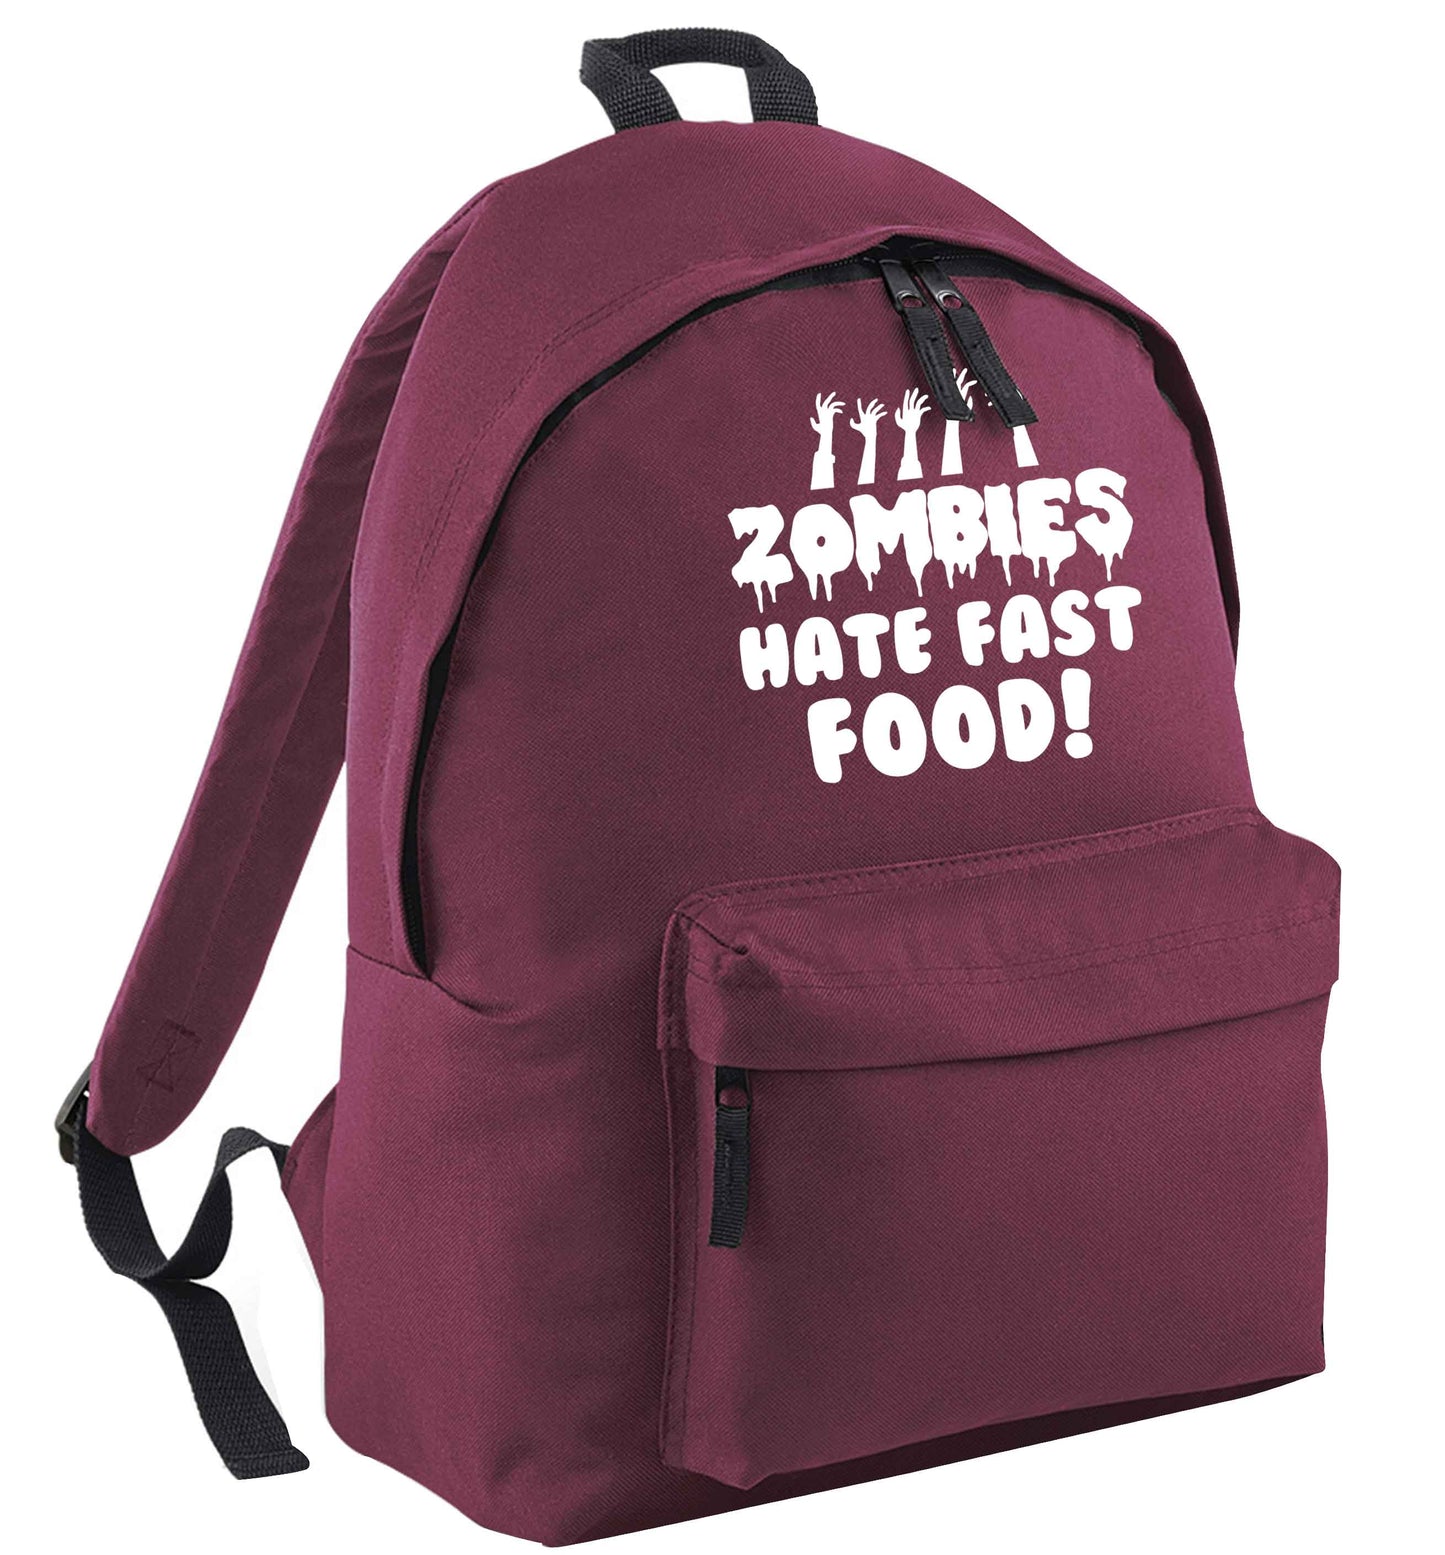 Zombies hate fast food maroon adults backpack